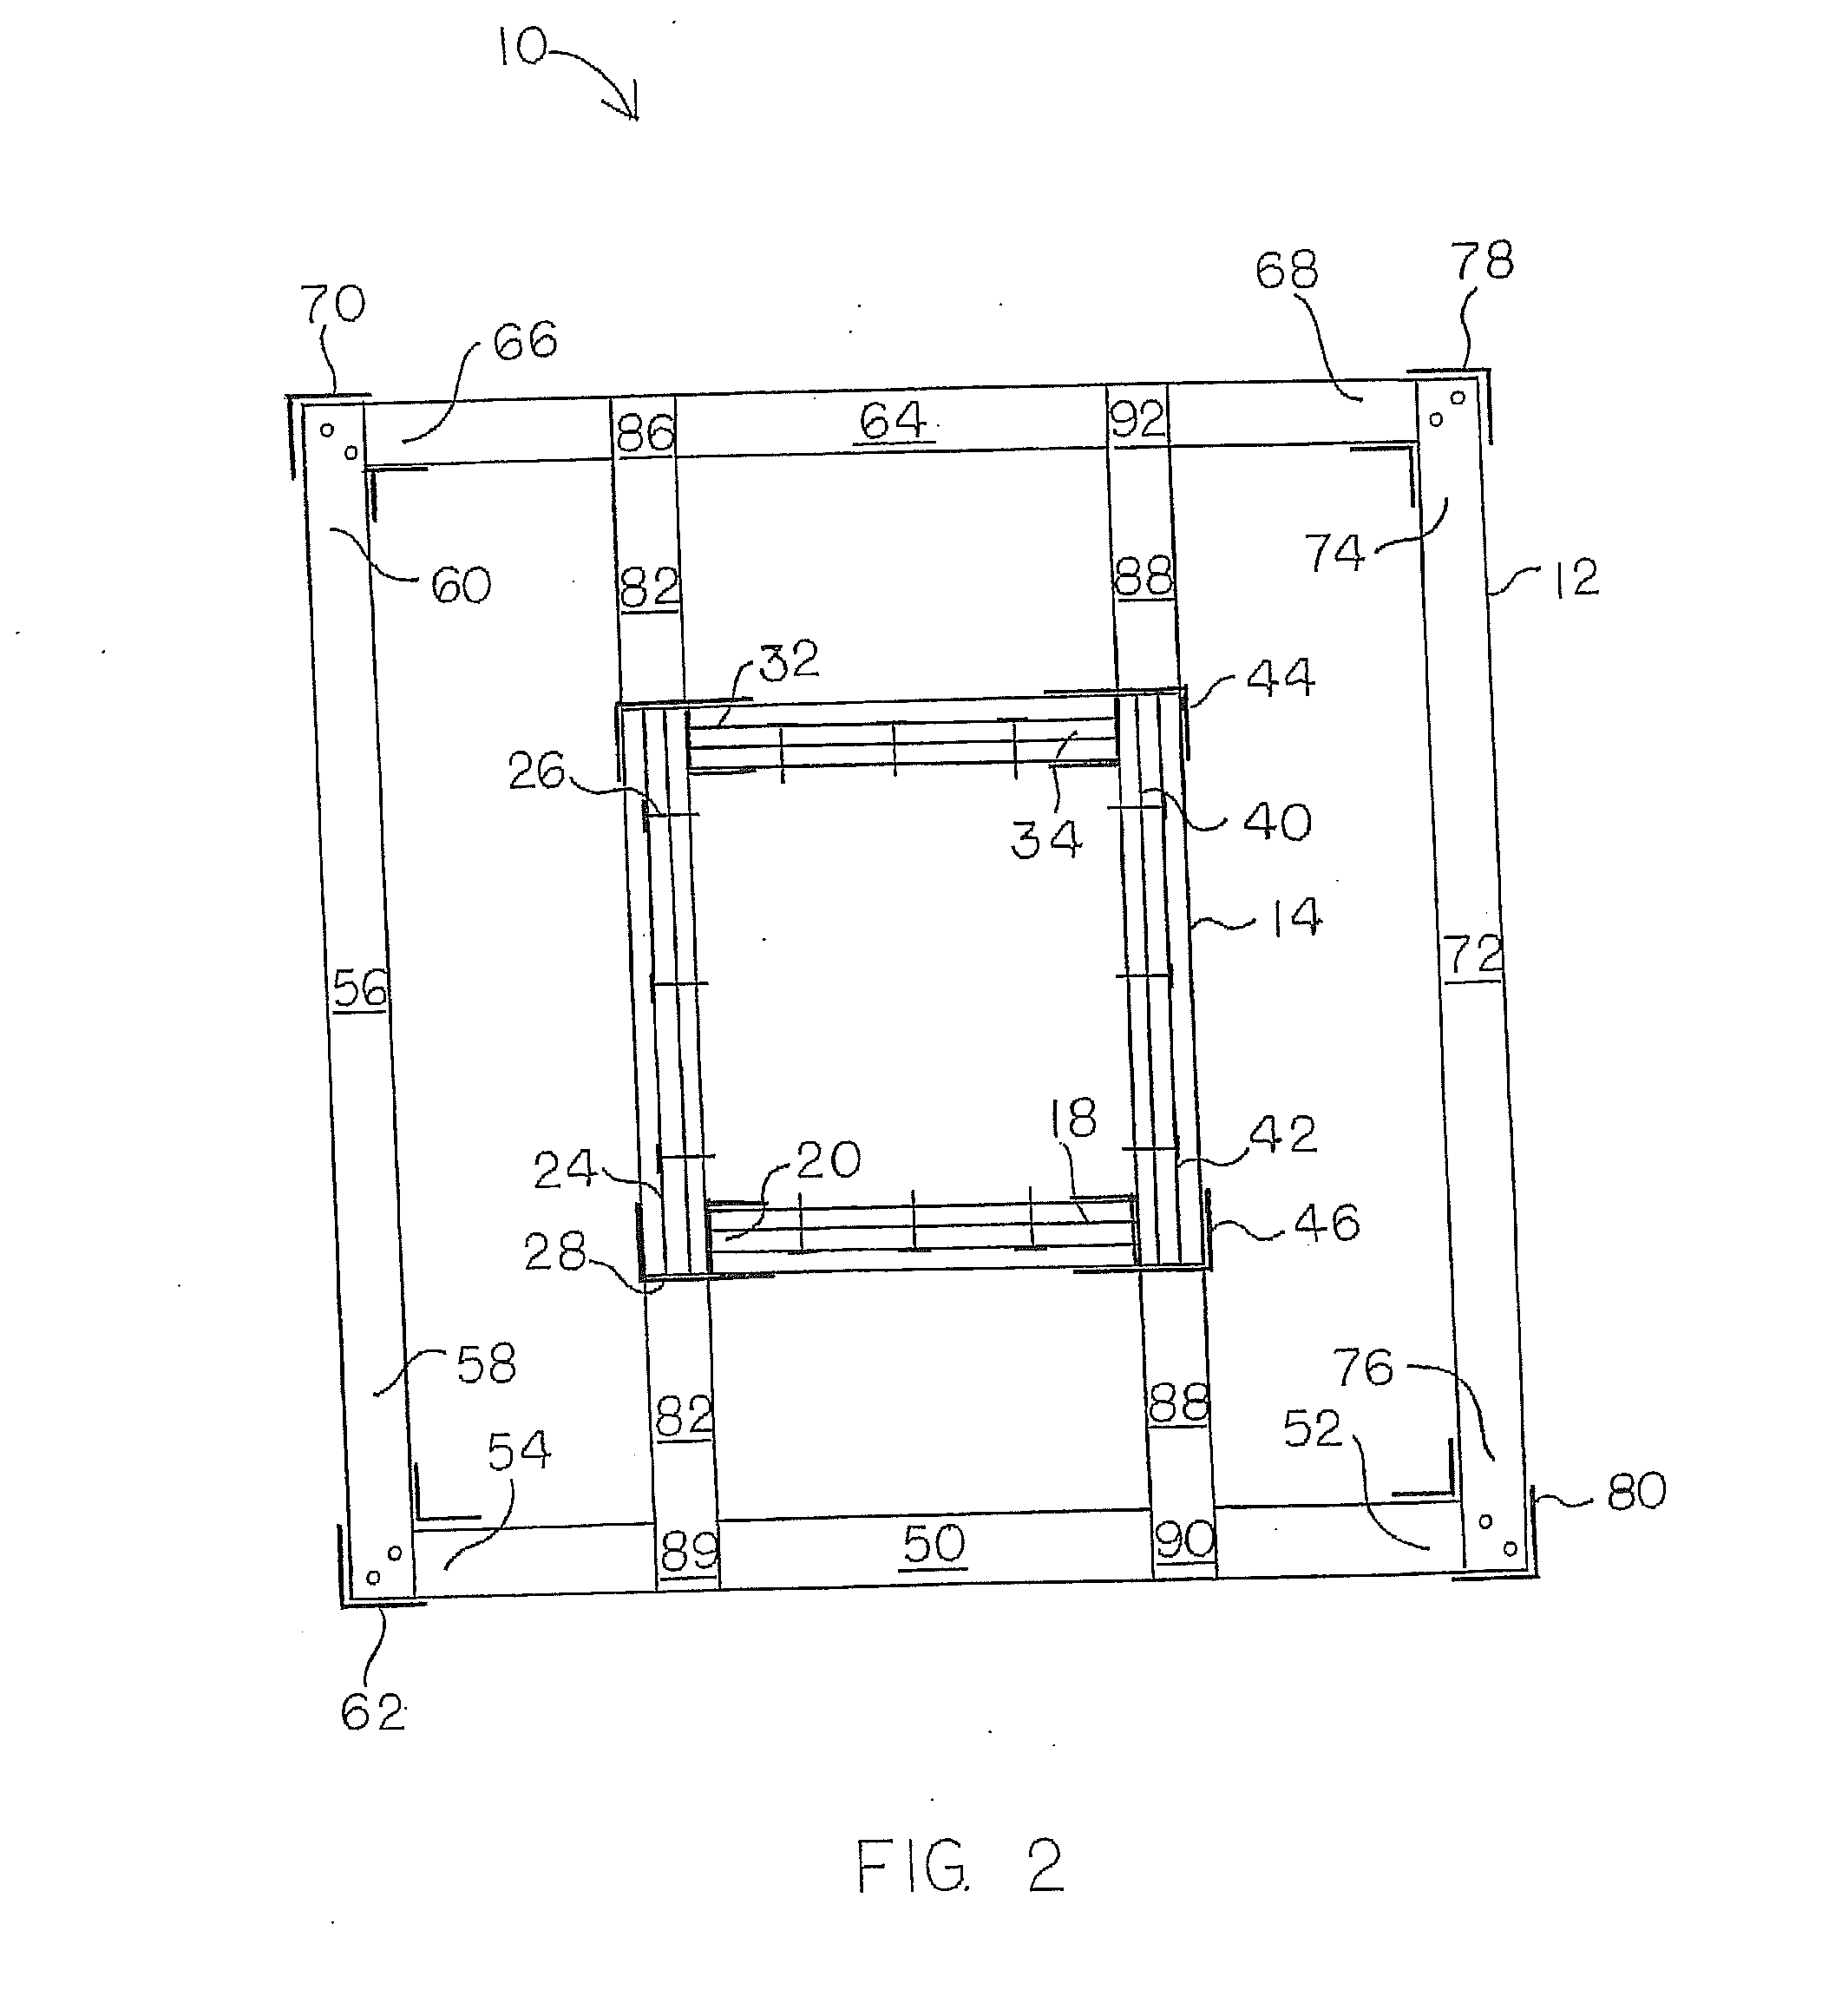 Method of constructing an insulated shallow pier foundation building